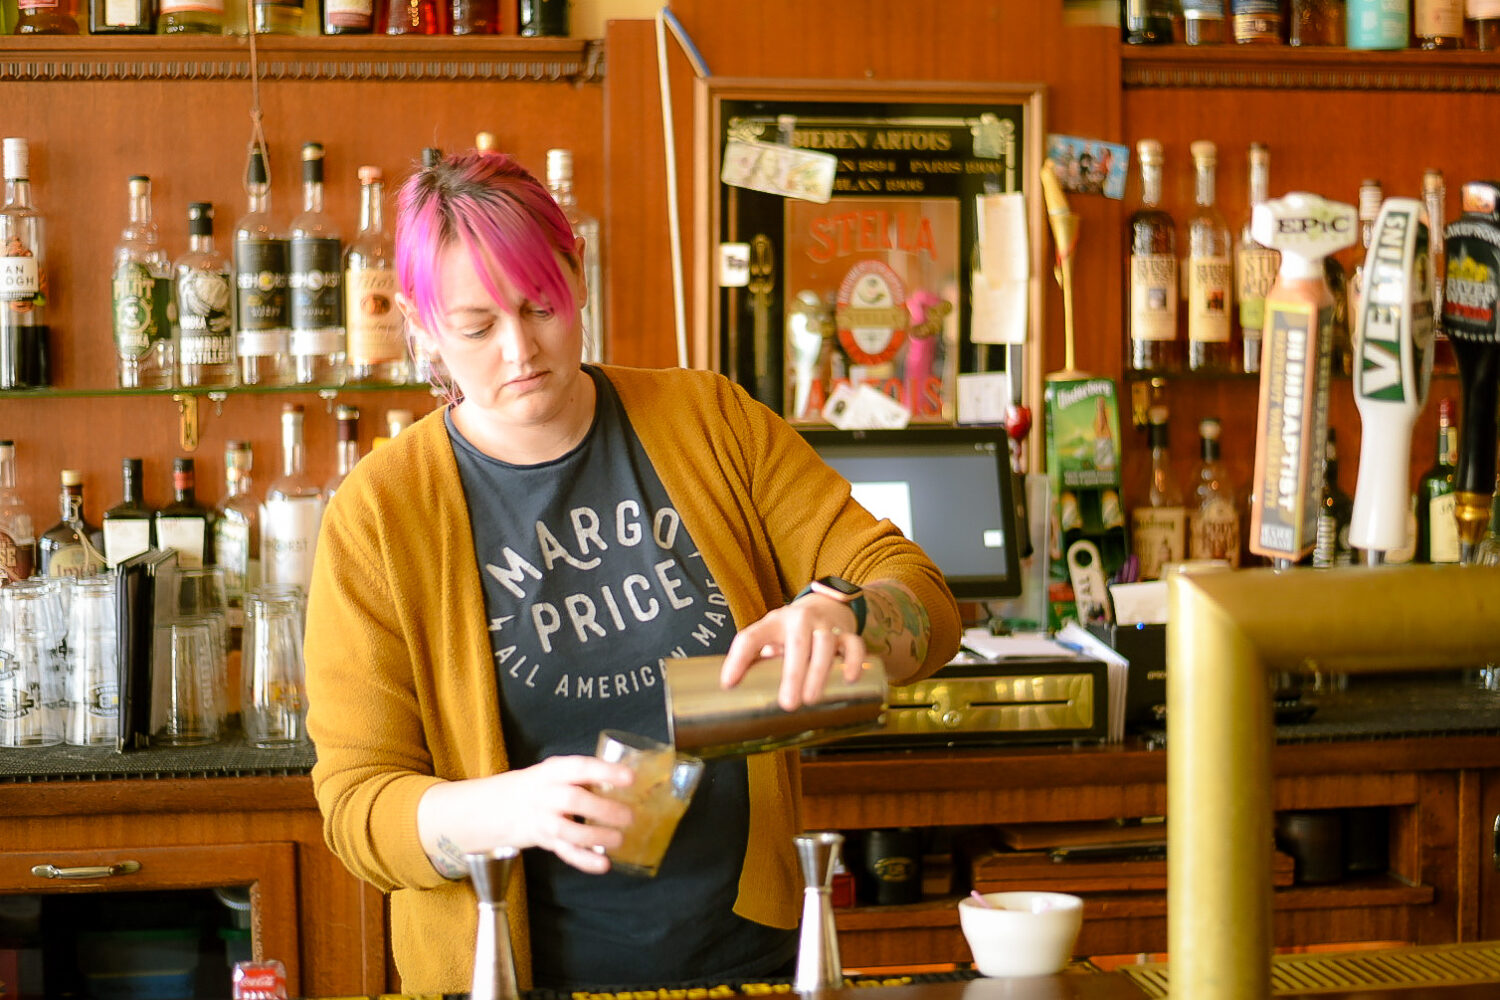 woman with pink hair behind a bar pouring a drink from a metal shaker into a tumbler glass